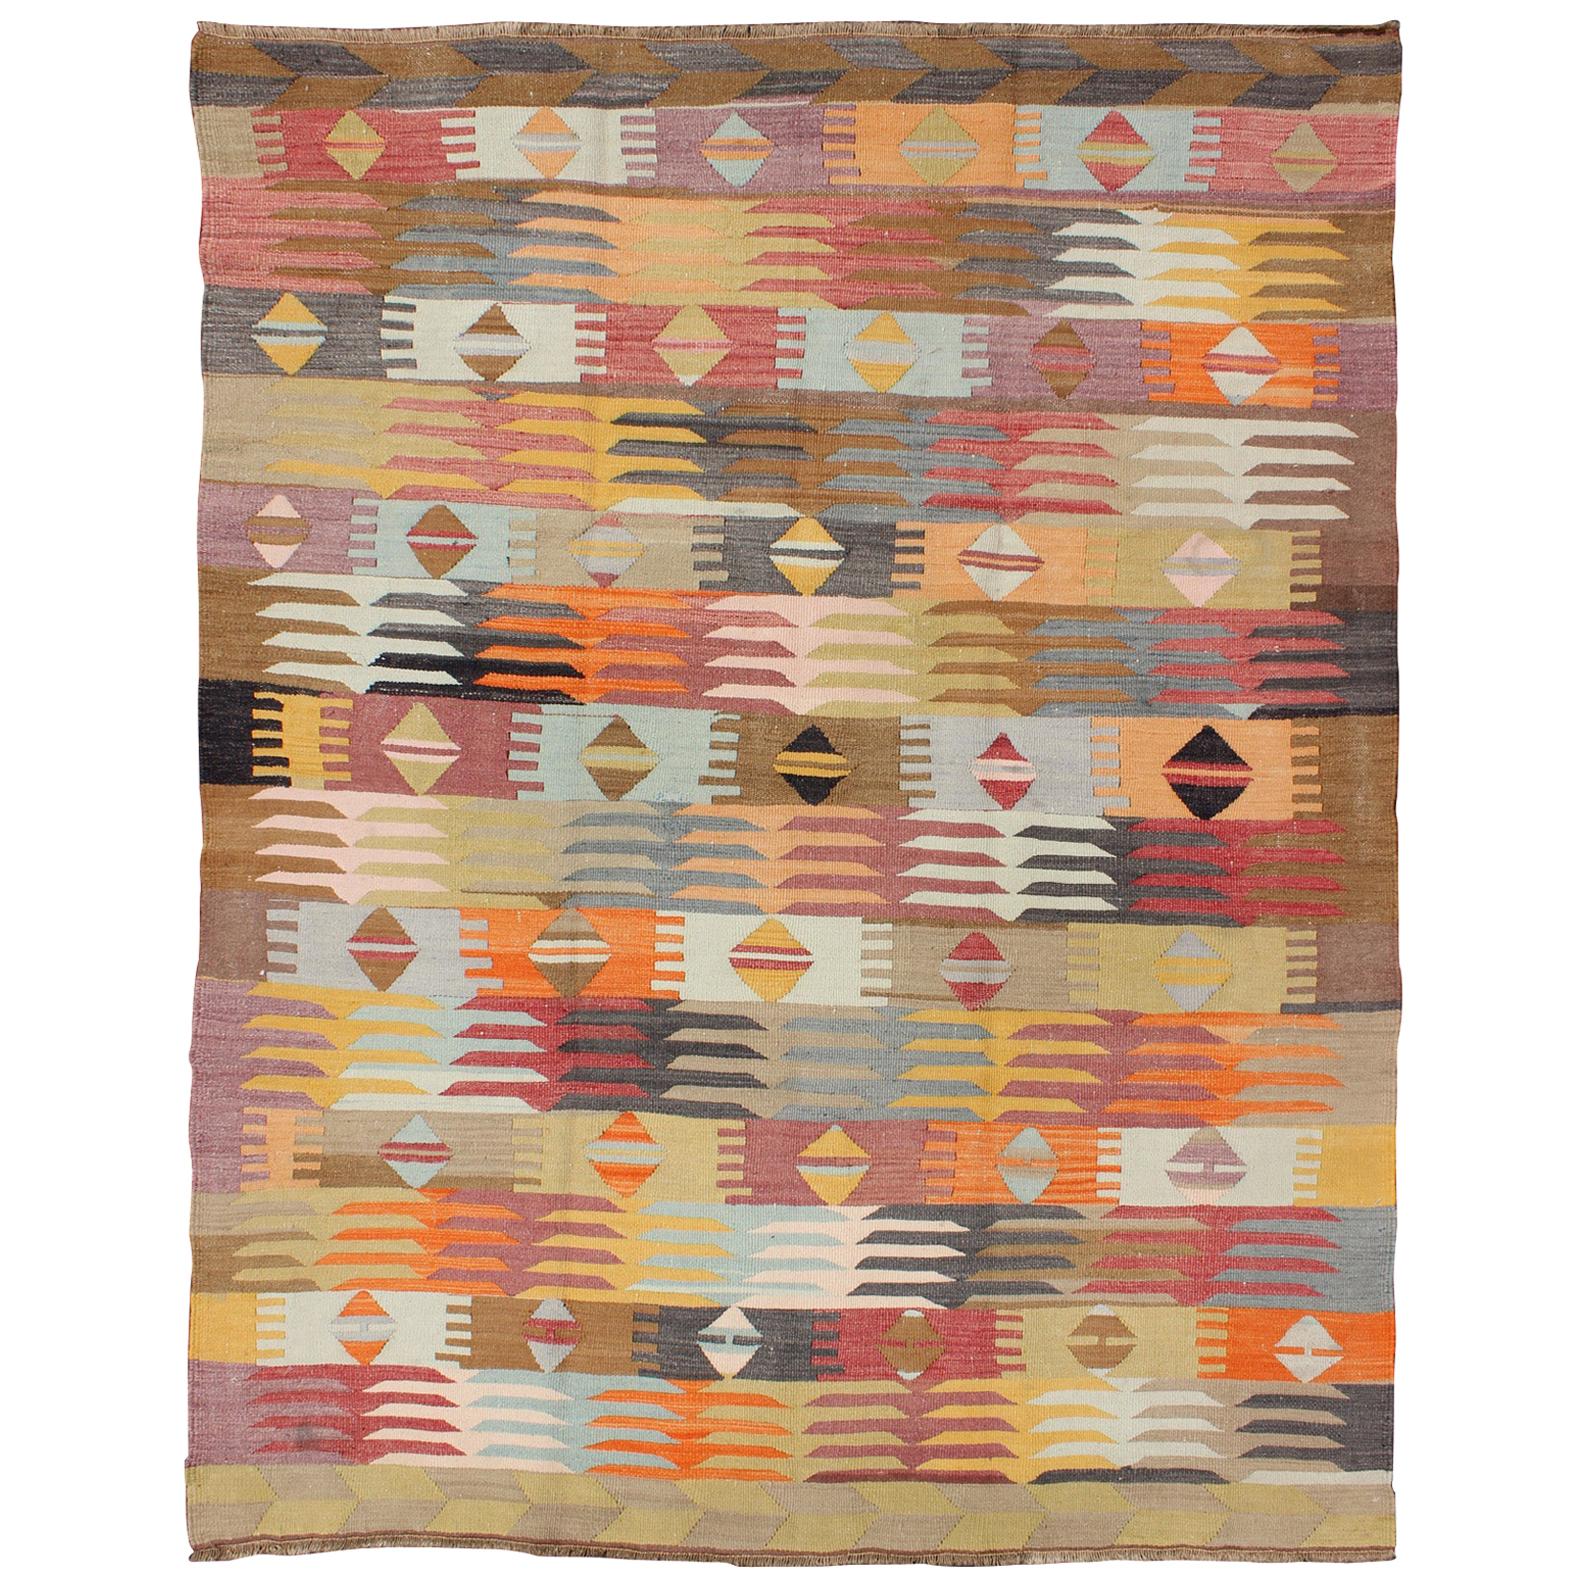 Colorful Vintage Turkish Kilim with All-Over Latching Design & Geometric Shapes For Sale